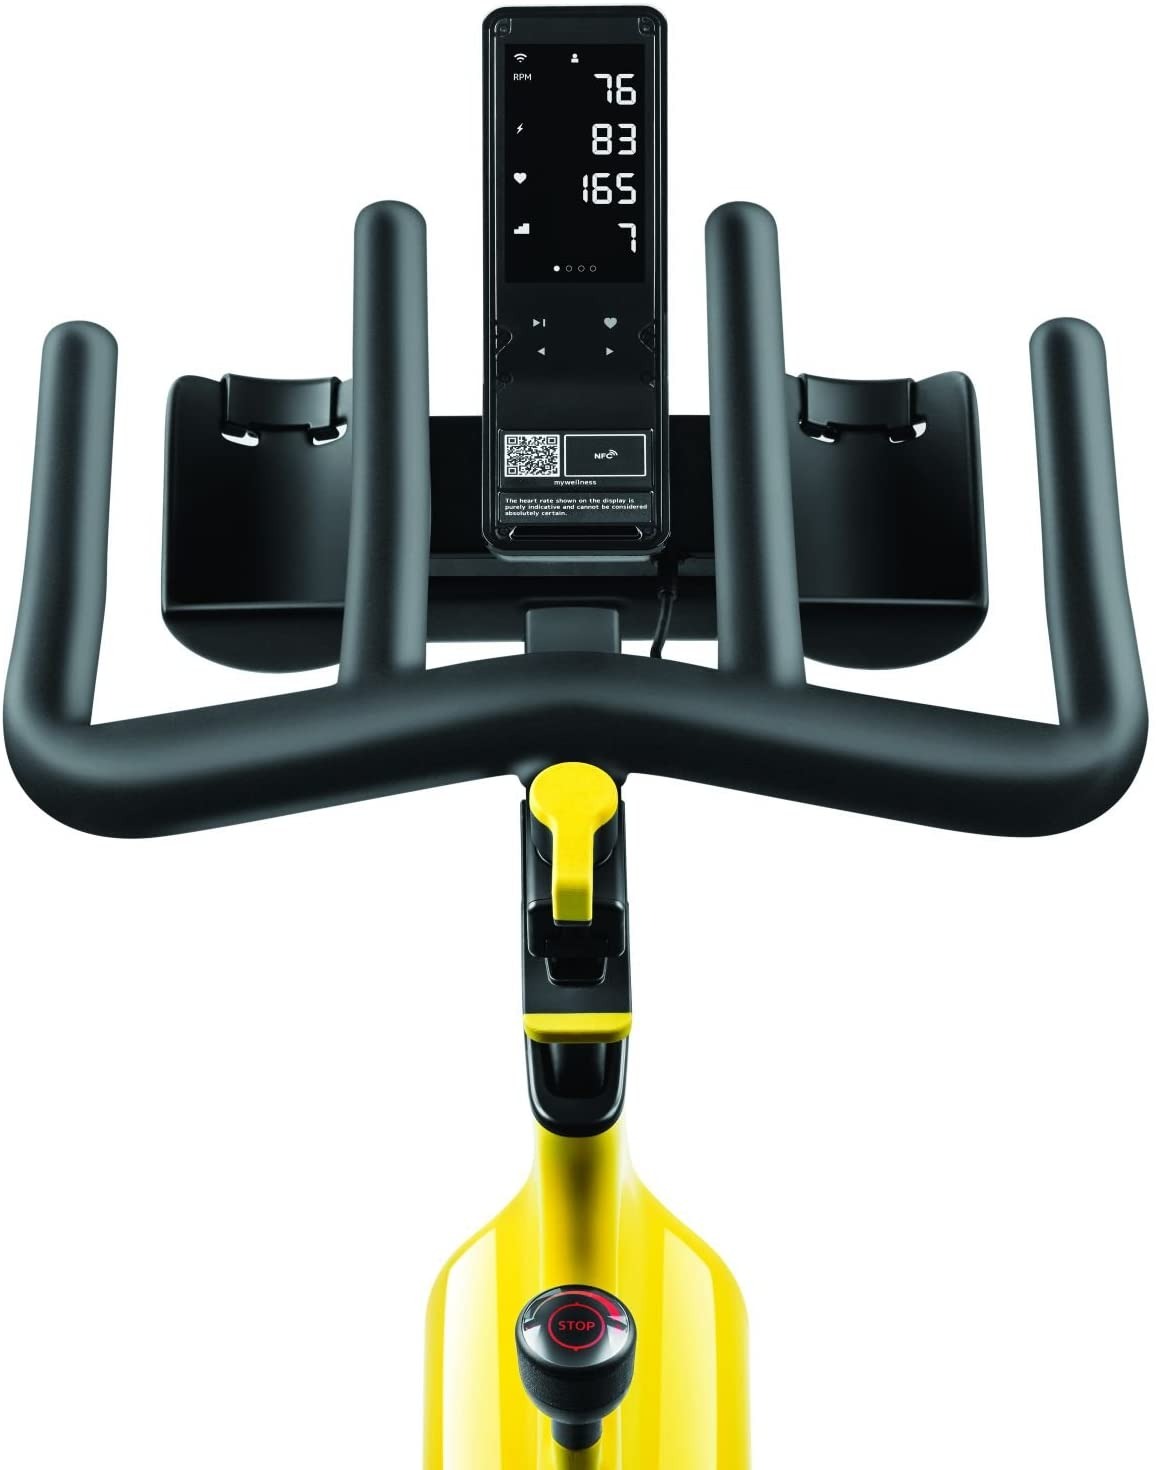 technogym-cycle-group-connect-hanolux.jpg